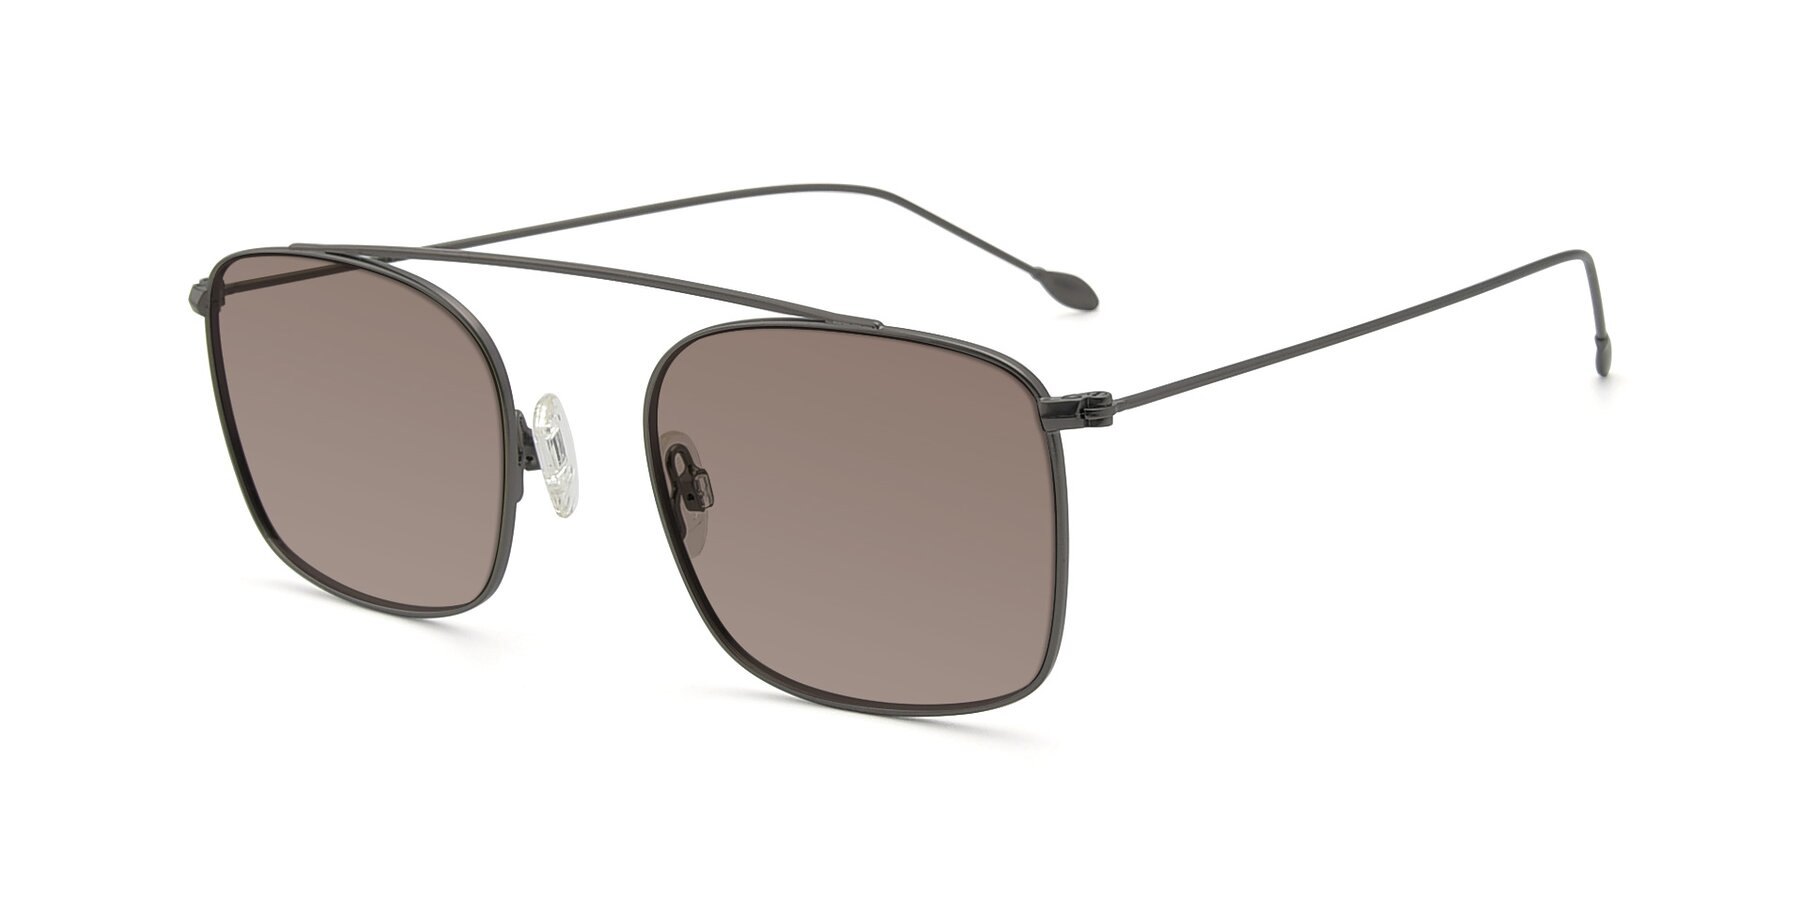 Angle of The Librarian in Gunmetal with Medium Brown Tinted Lenses